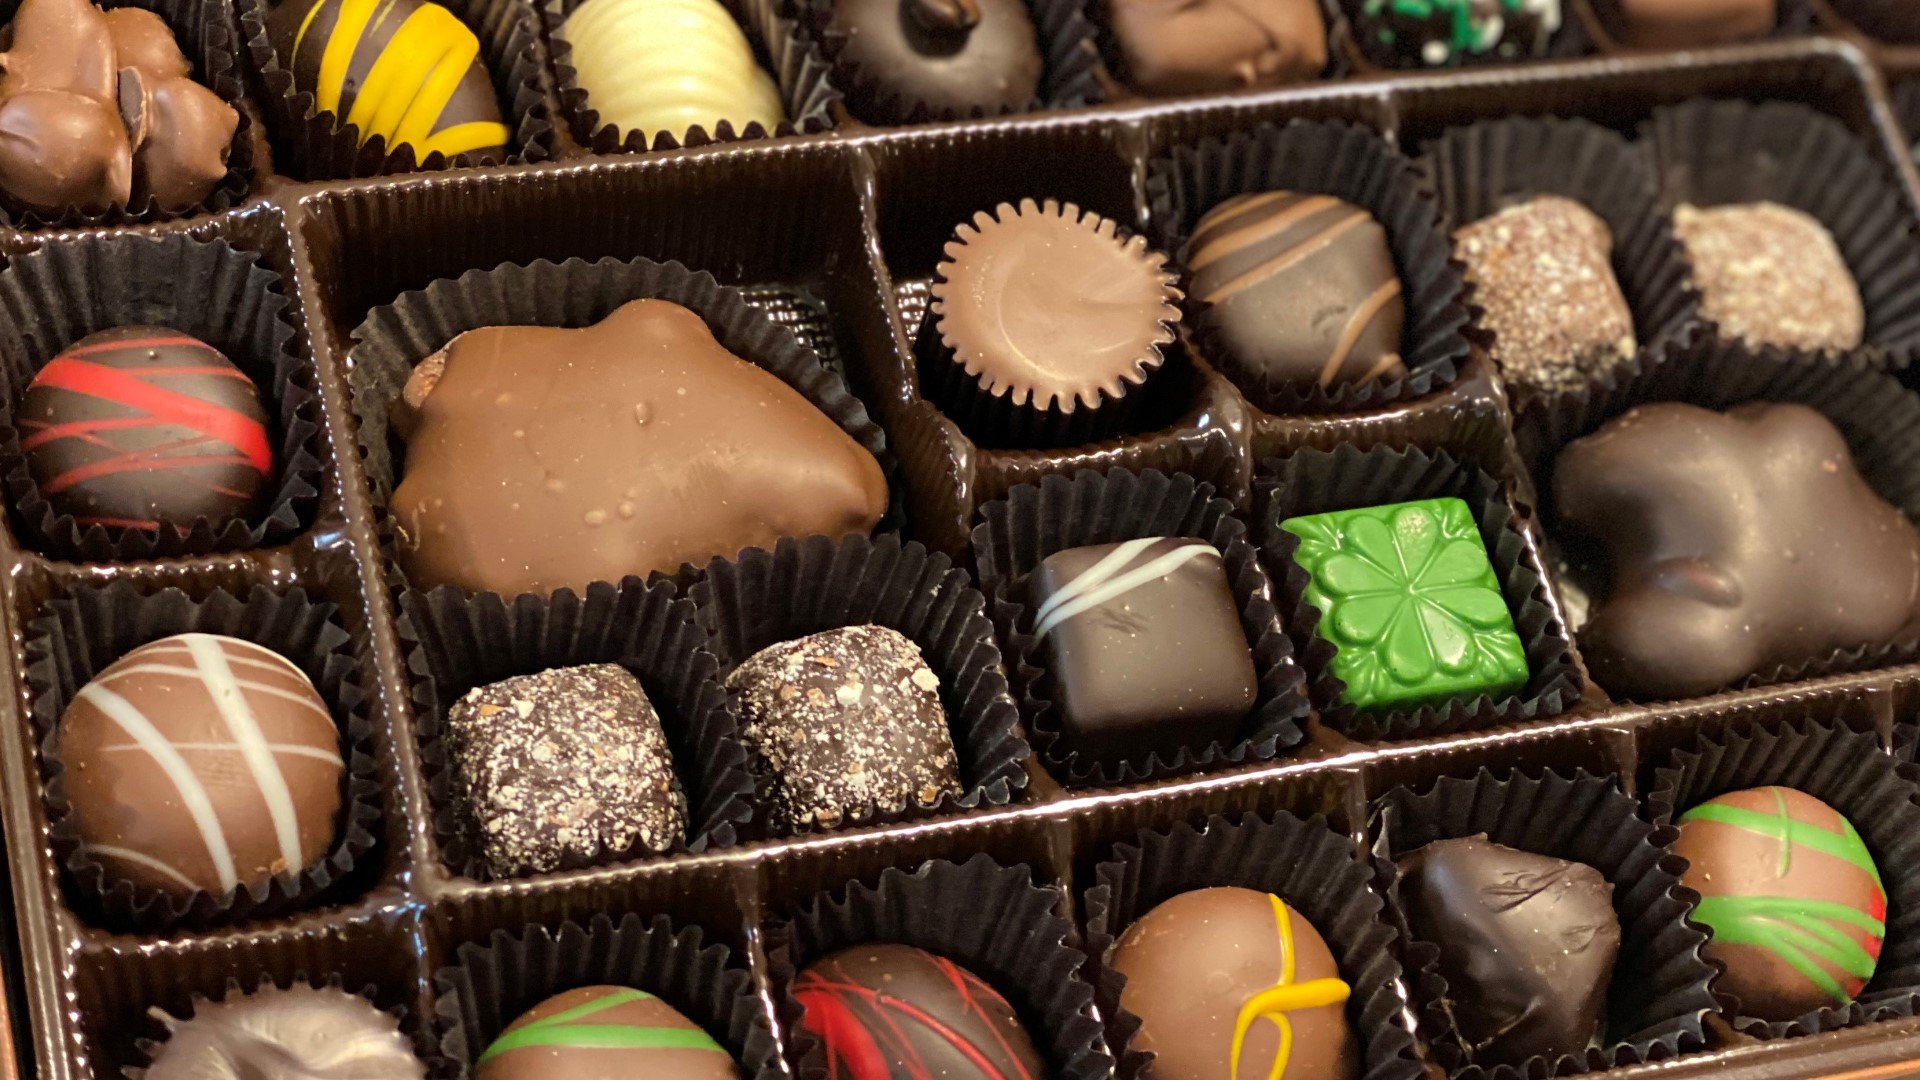 From special Easter peanut butter cups to creative candy bars, many local shops that sell sweet treats are gearing up to welcome the holiday rush.